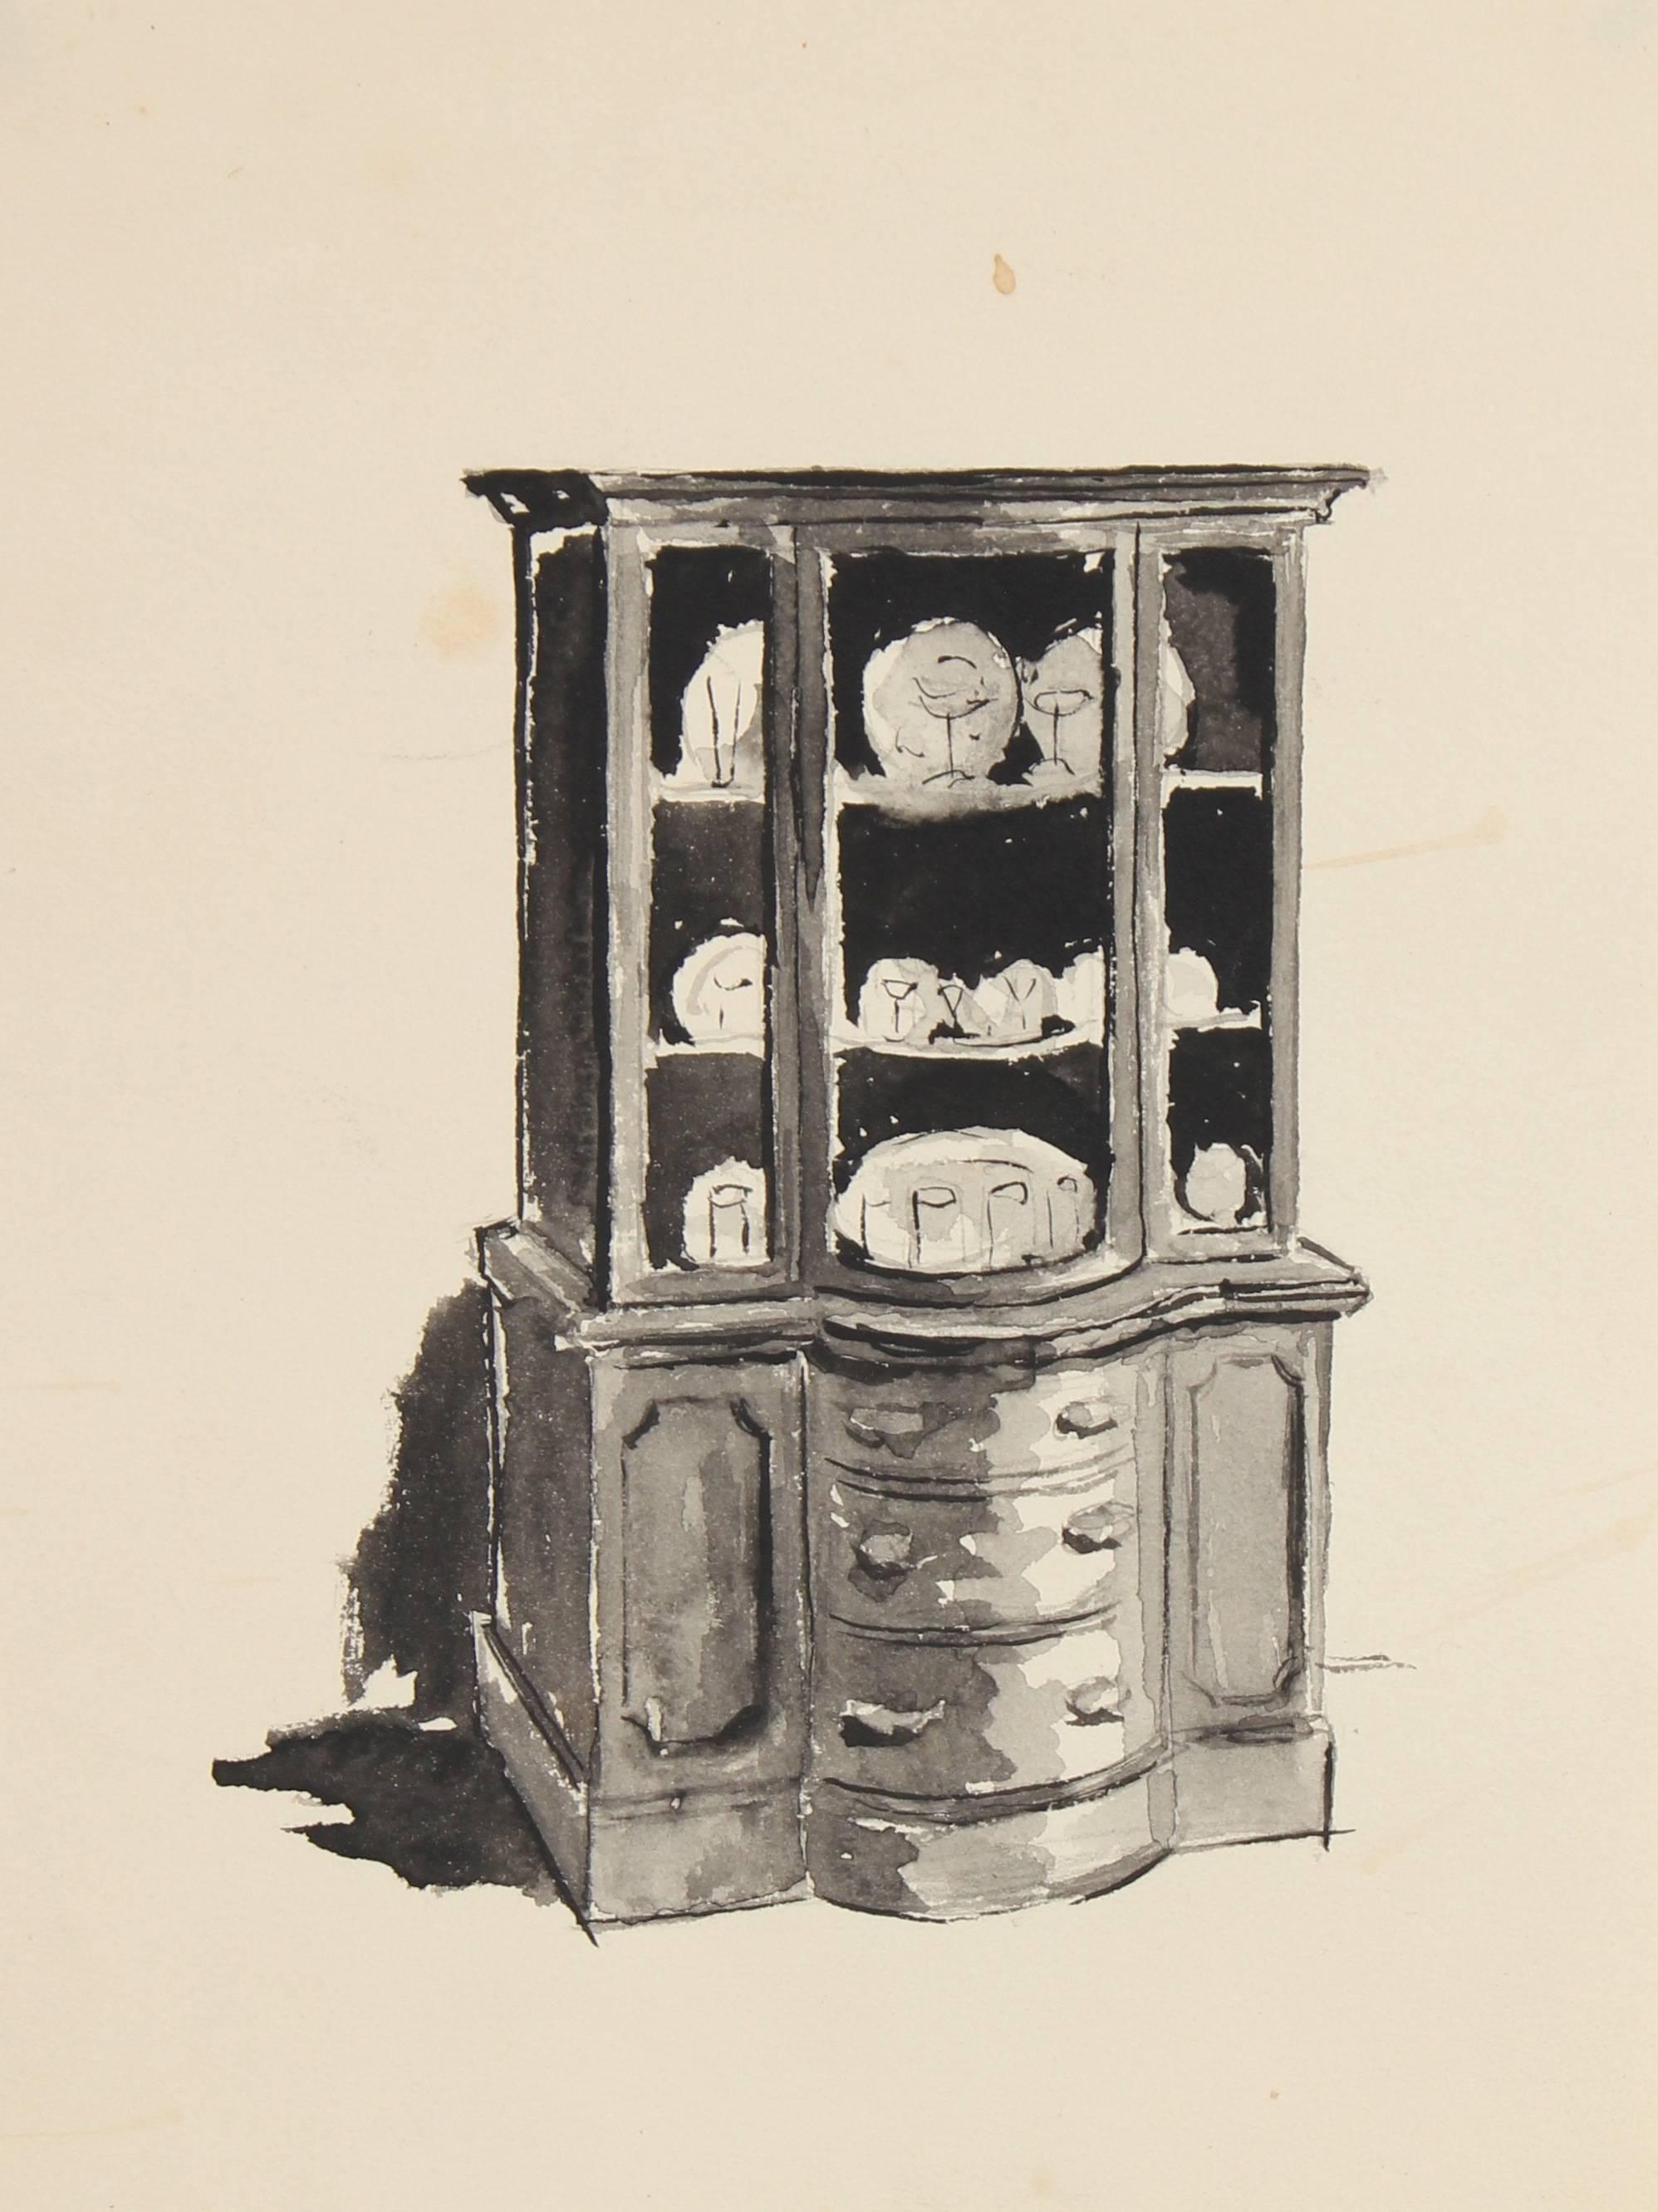 Small Furniture Illustration in Ink, Circa 1970s - American Modern Art by Jane Mitchell